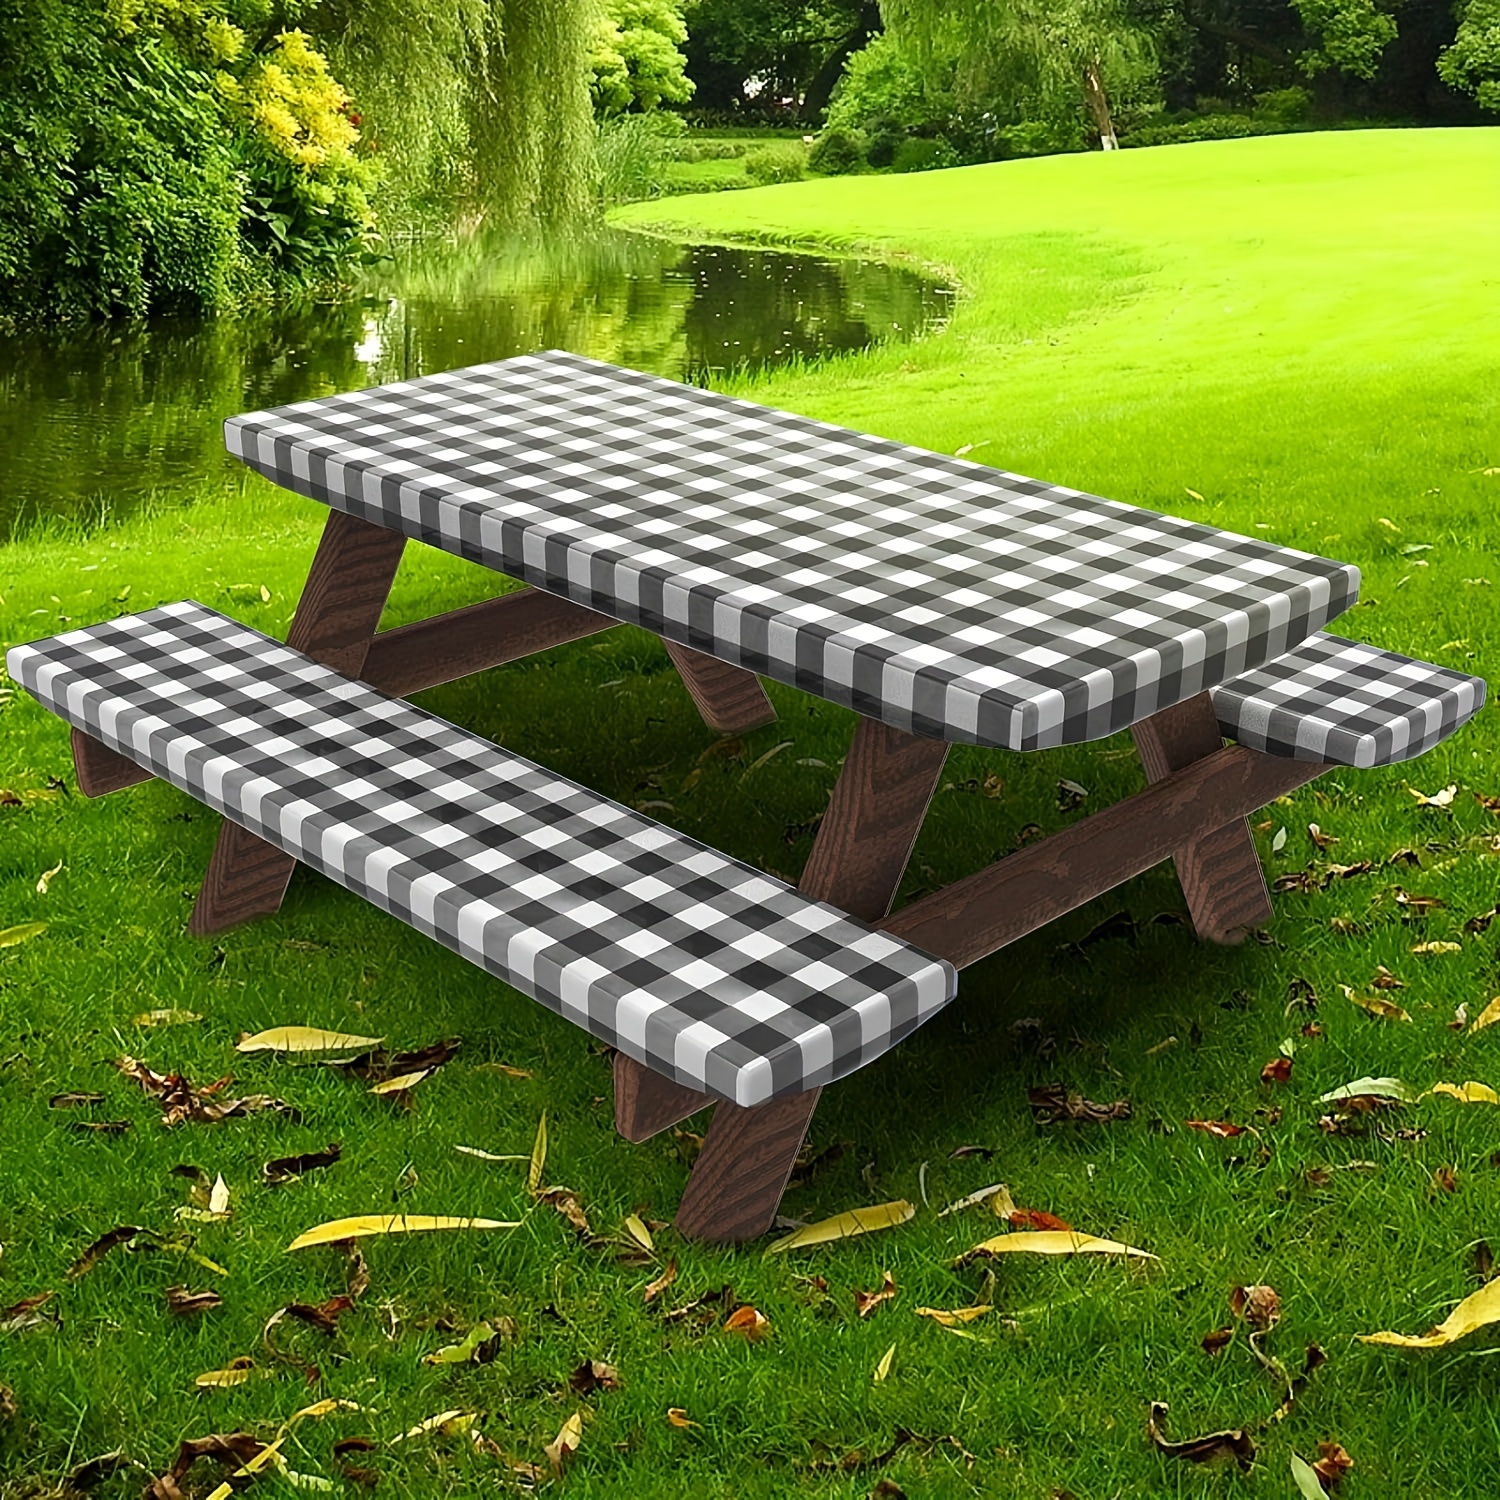 

3pcs/set Picnic Table And Bench Cover, Fitted Sheet With Bench Cover, Vinyl, Elastic, Plaid, Oil-proof And Waterproof, Suitable For Camping, Dining, Outdoor, Park, Patio